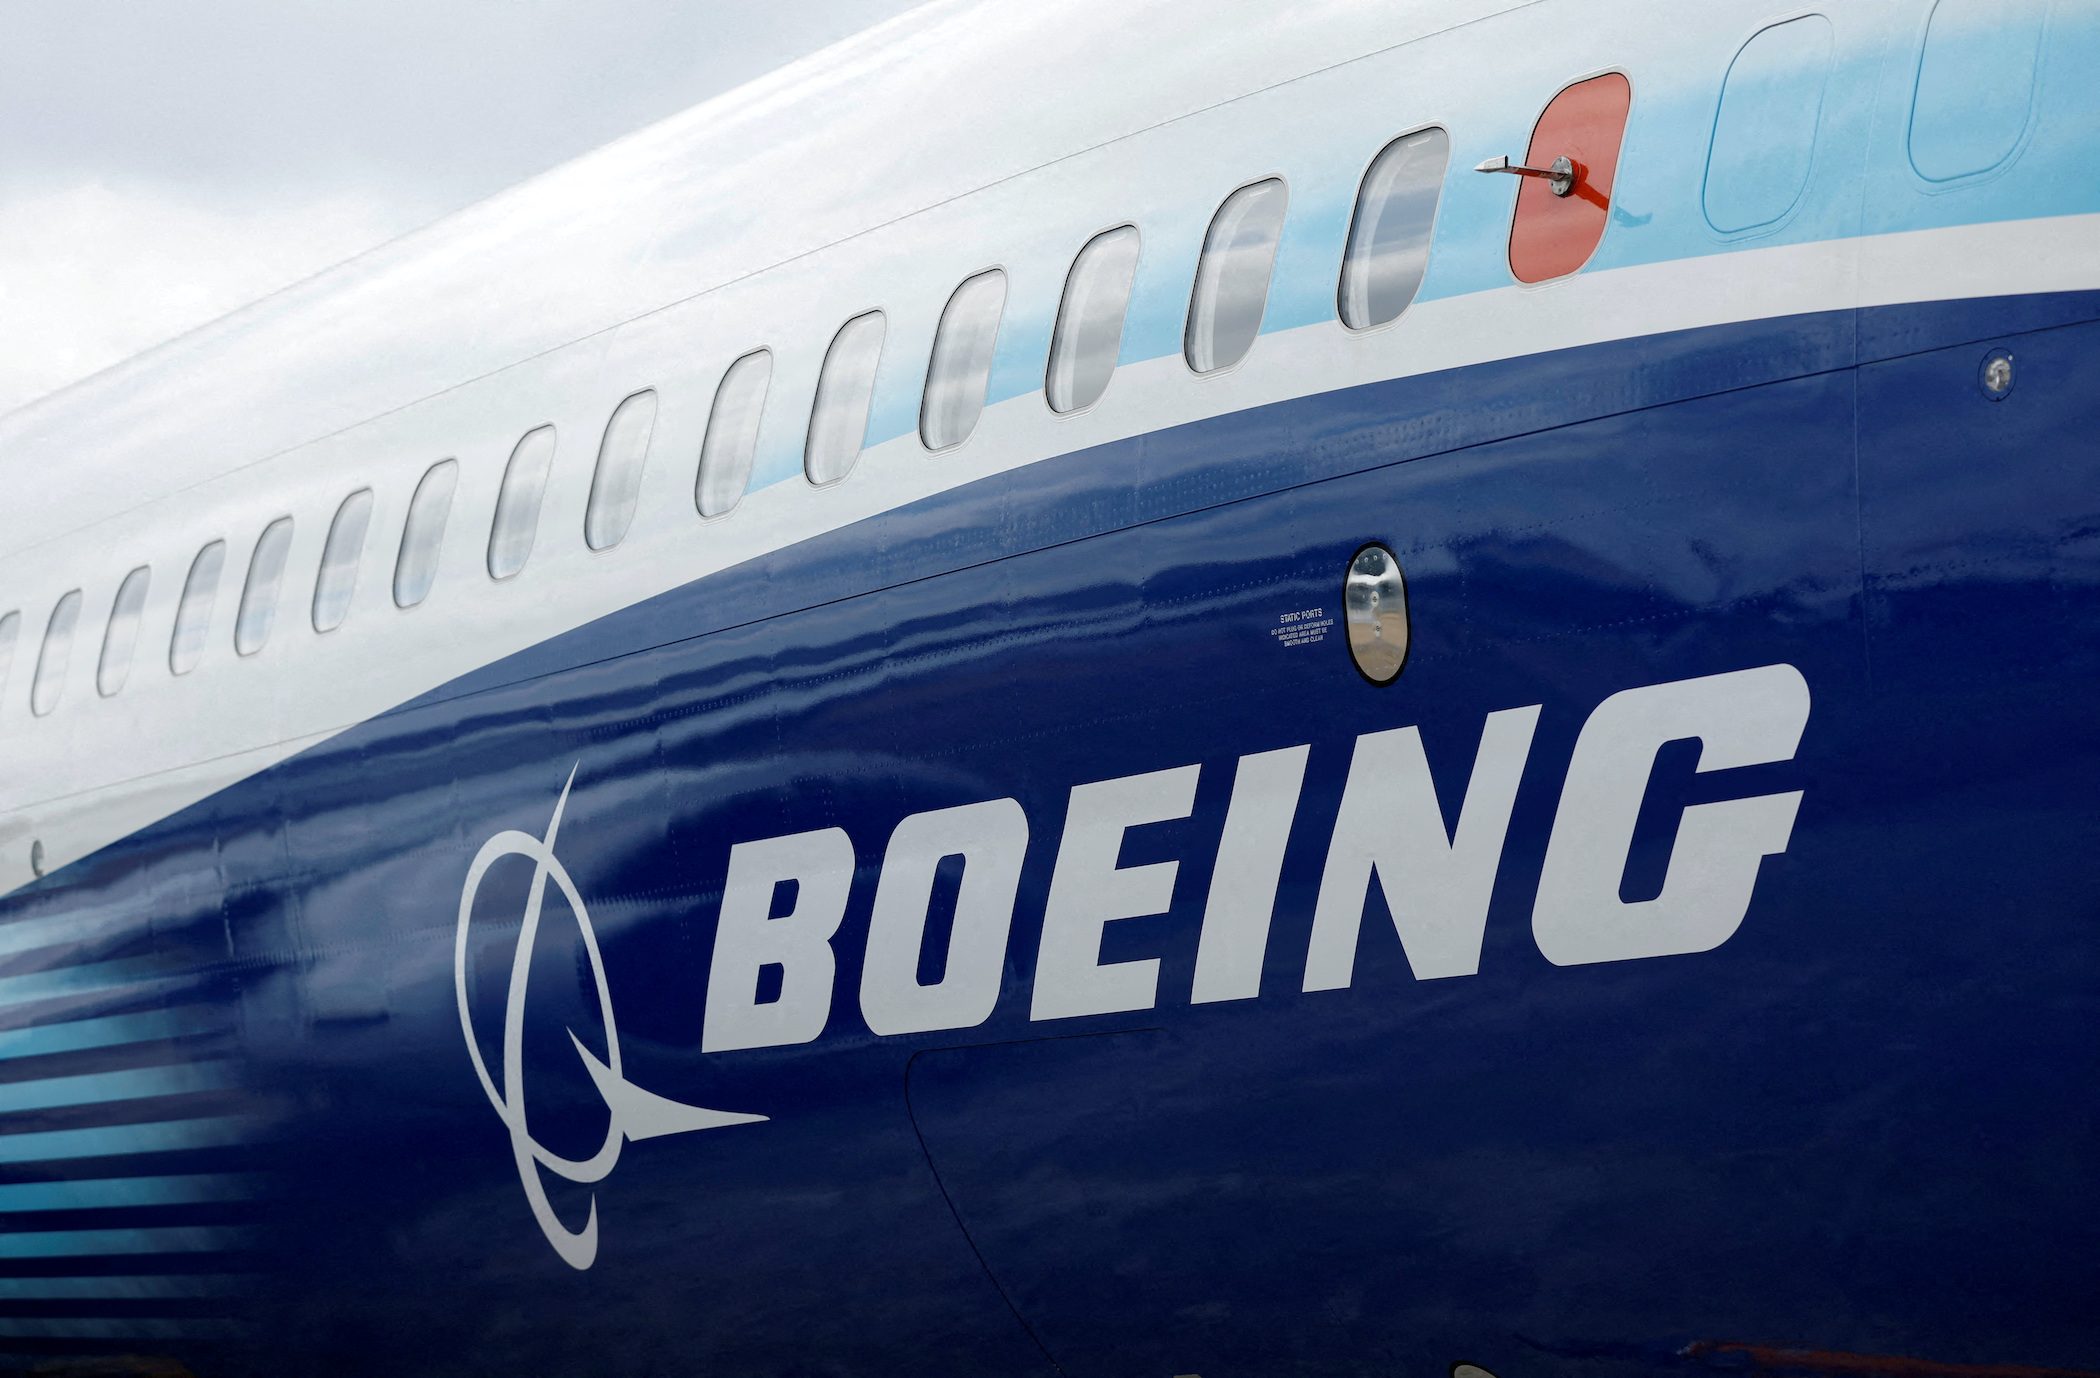 Boeing cuts estimates for 737 MAX deliveries, flags supply chain constraints